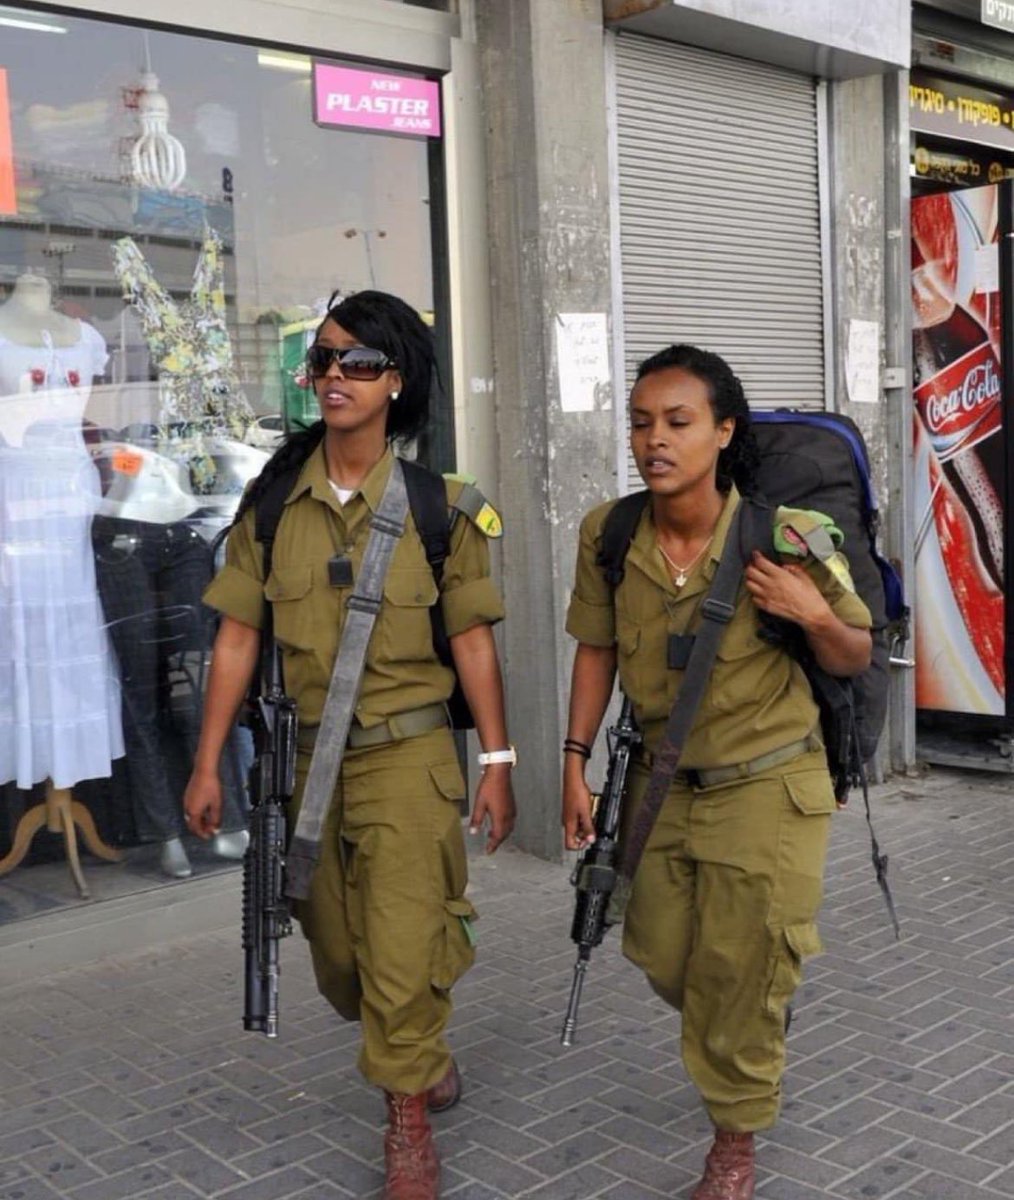 IDF soldiers. Because, you know, Israel is a misogynistic, white supremacist regime.